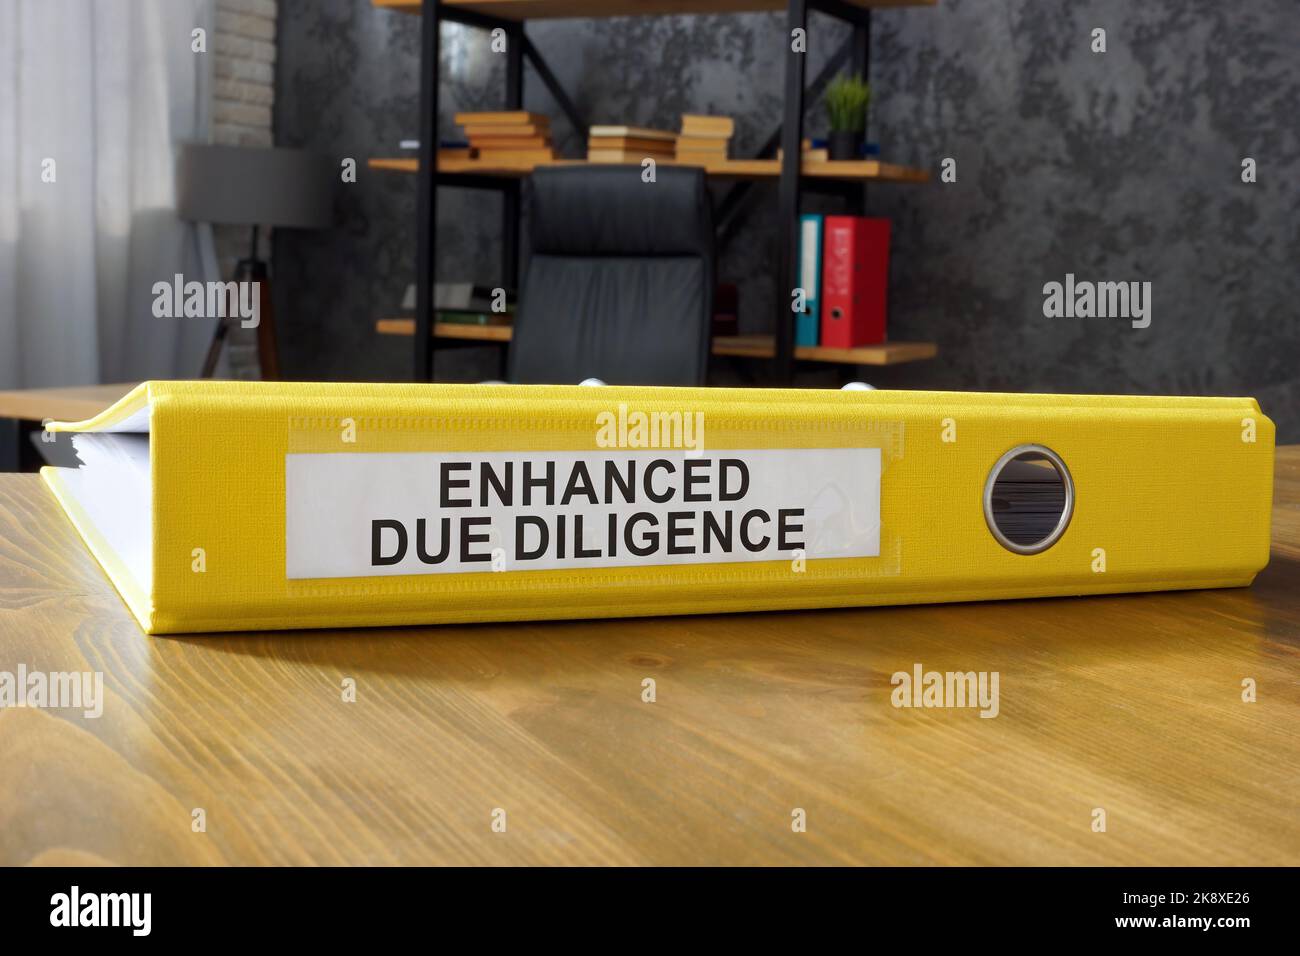 Folder with papers about enhanced due diligence. Stock Photo